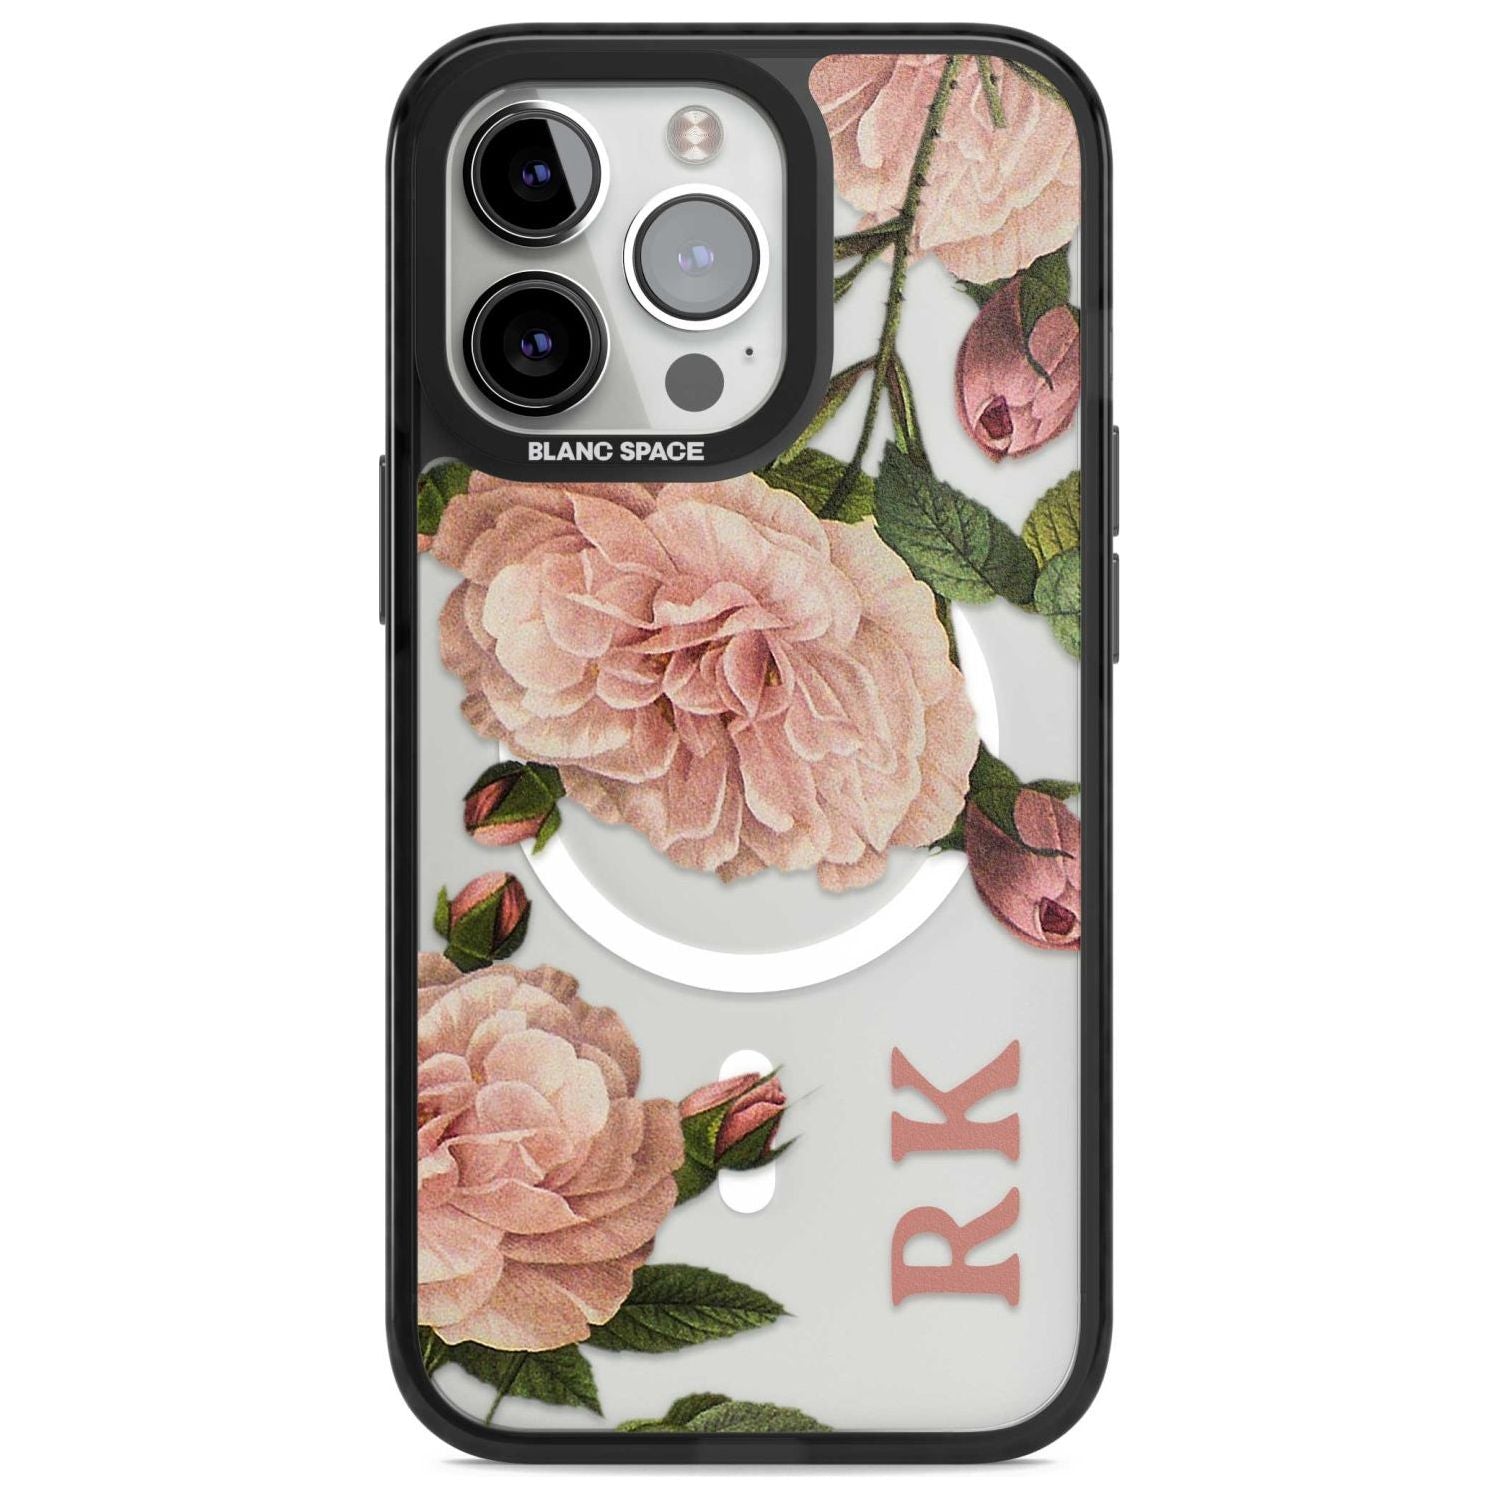 Personalised Clear Vintage Floral Pale Pink Peonies Custom Phone Case iPhone 15 Pro Max / Magsafe Black Impact Case,iPhone 15 Pro / Magsafe Black Impact Case,iPhone 14 Pro Max / Magsafe Black Impact Case,iPhone 14 Pro / Magsafe Black Impact Case,iPhone 13 Pro / Magsafe Black Impact Case Blanc Space